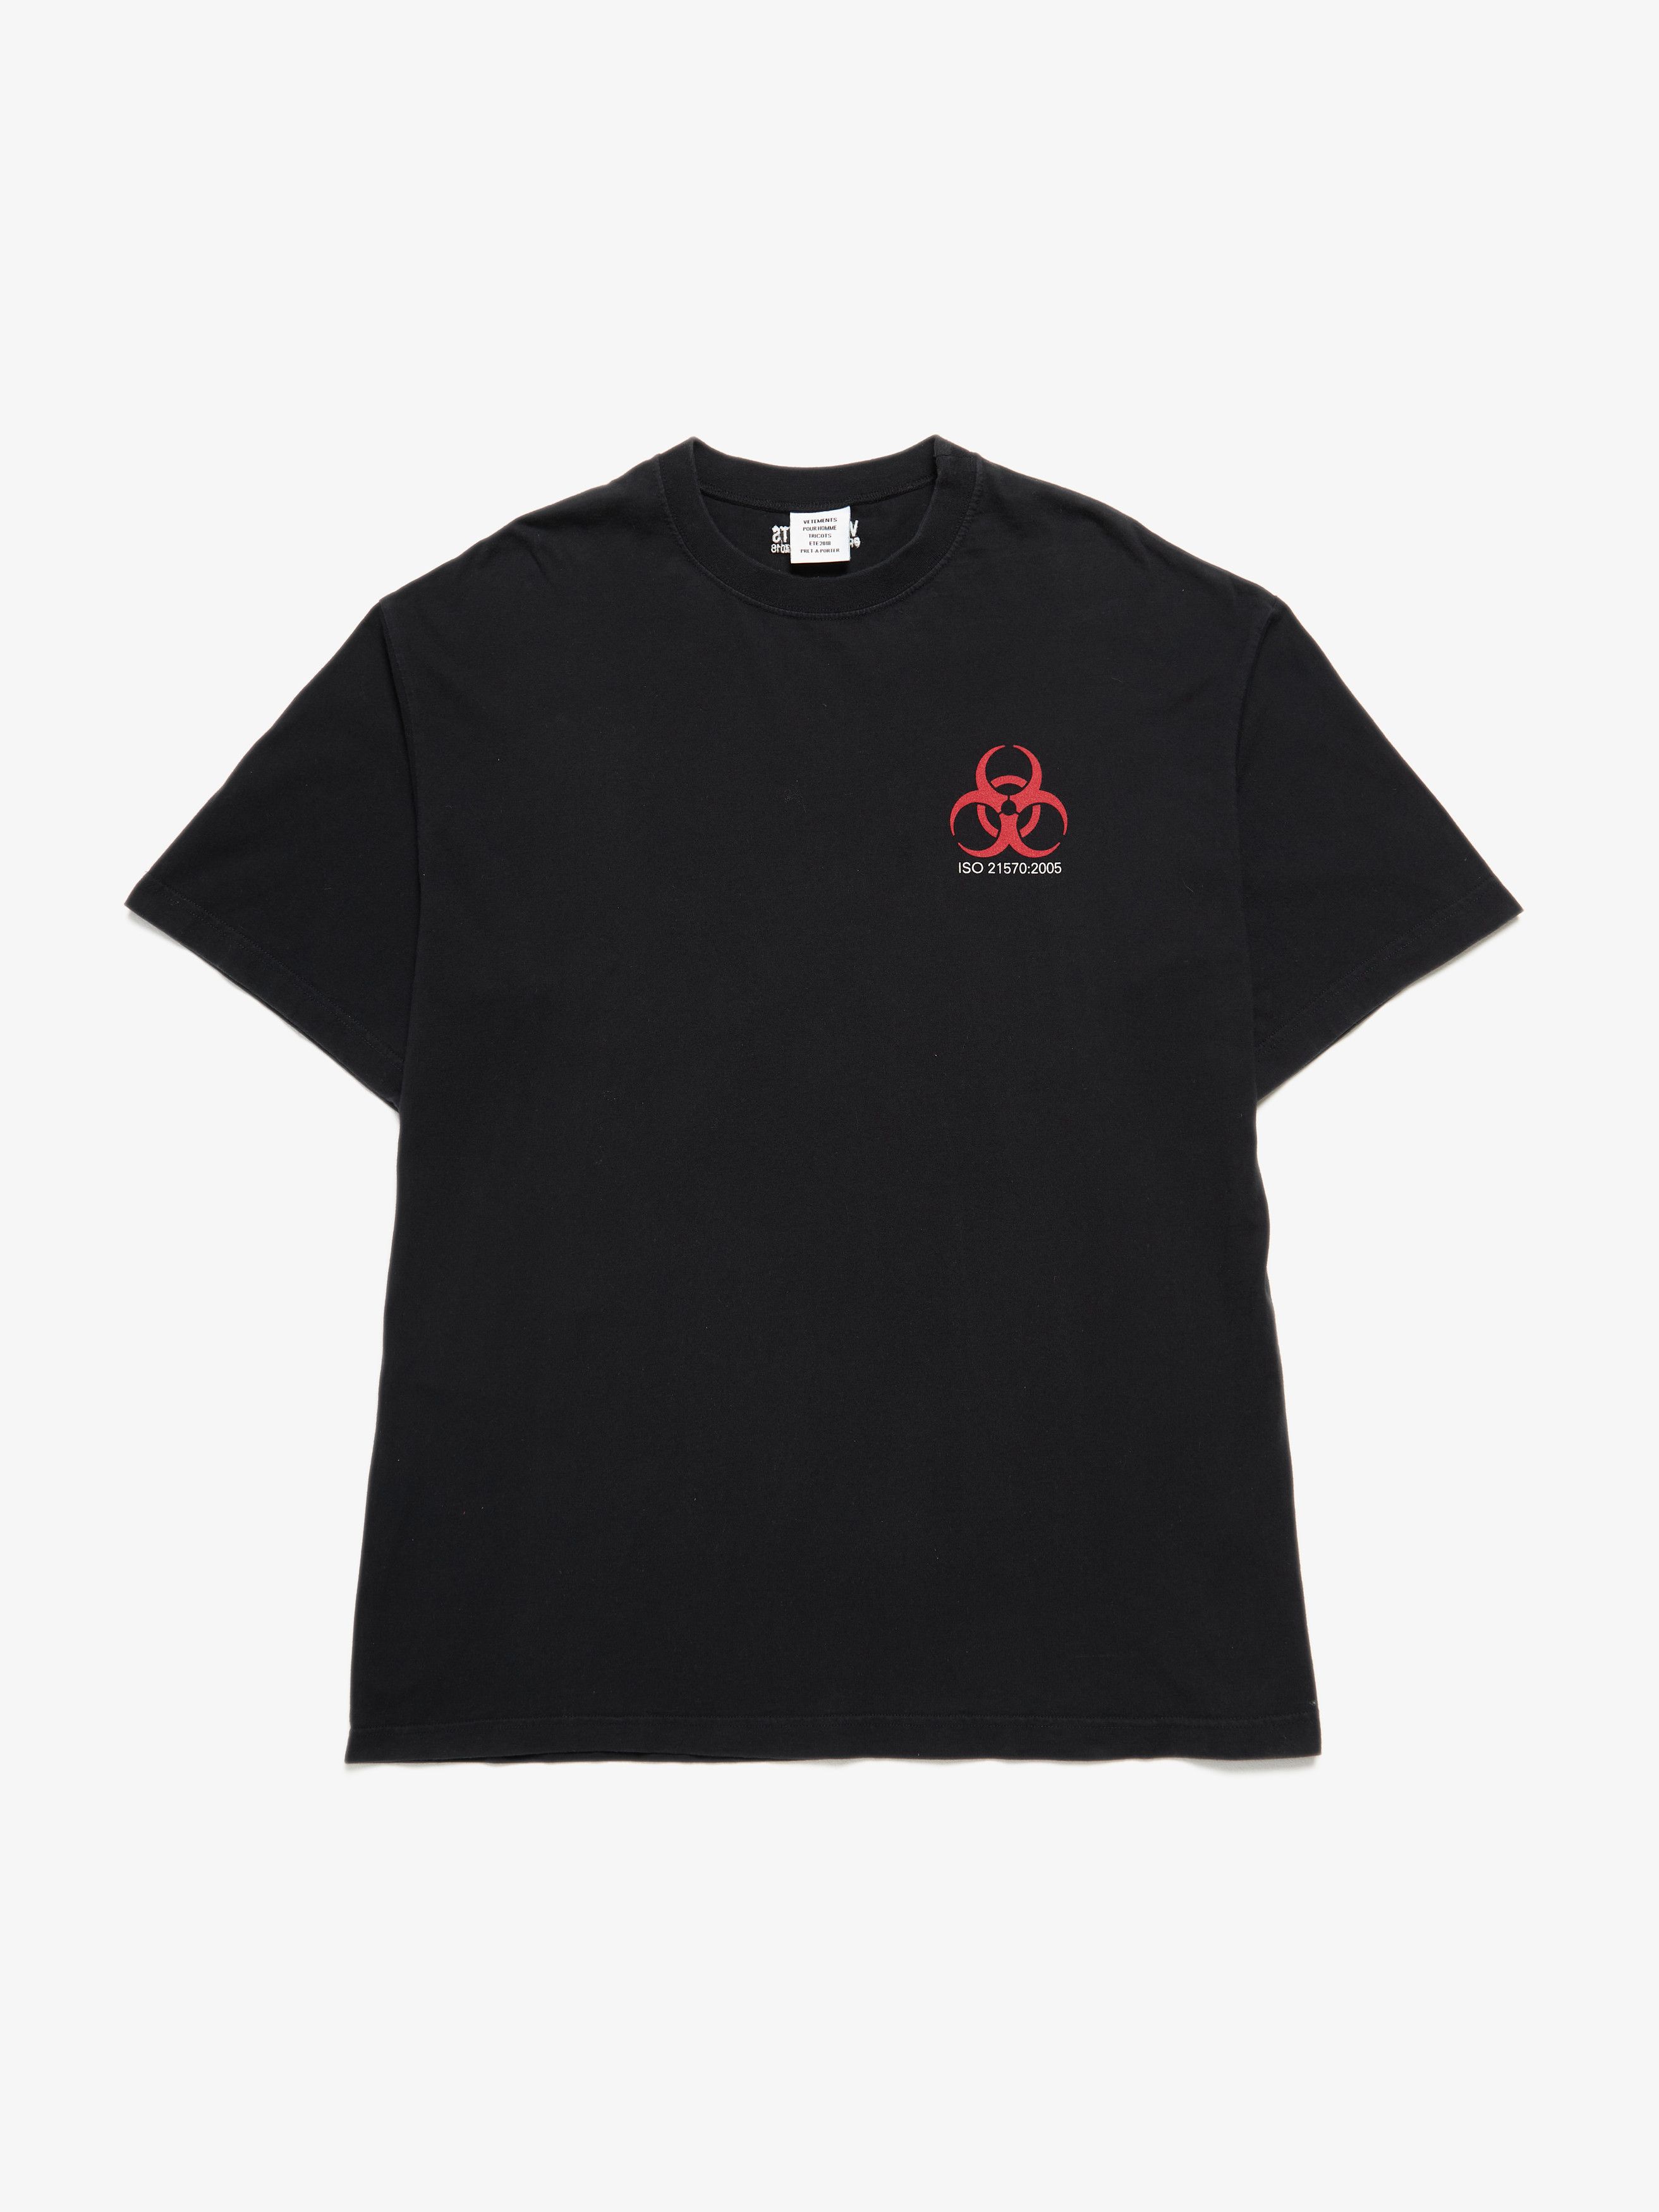 Vetements Genetically Modified T-shirt | Grailed